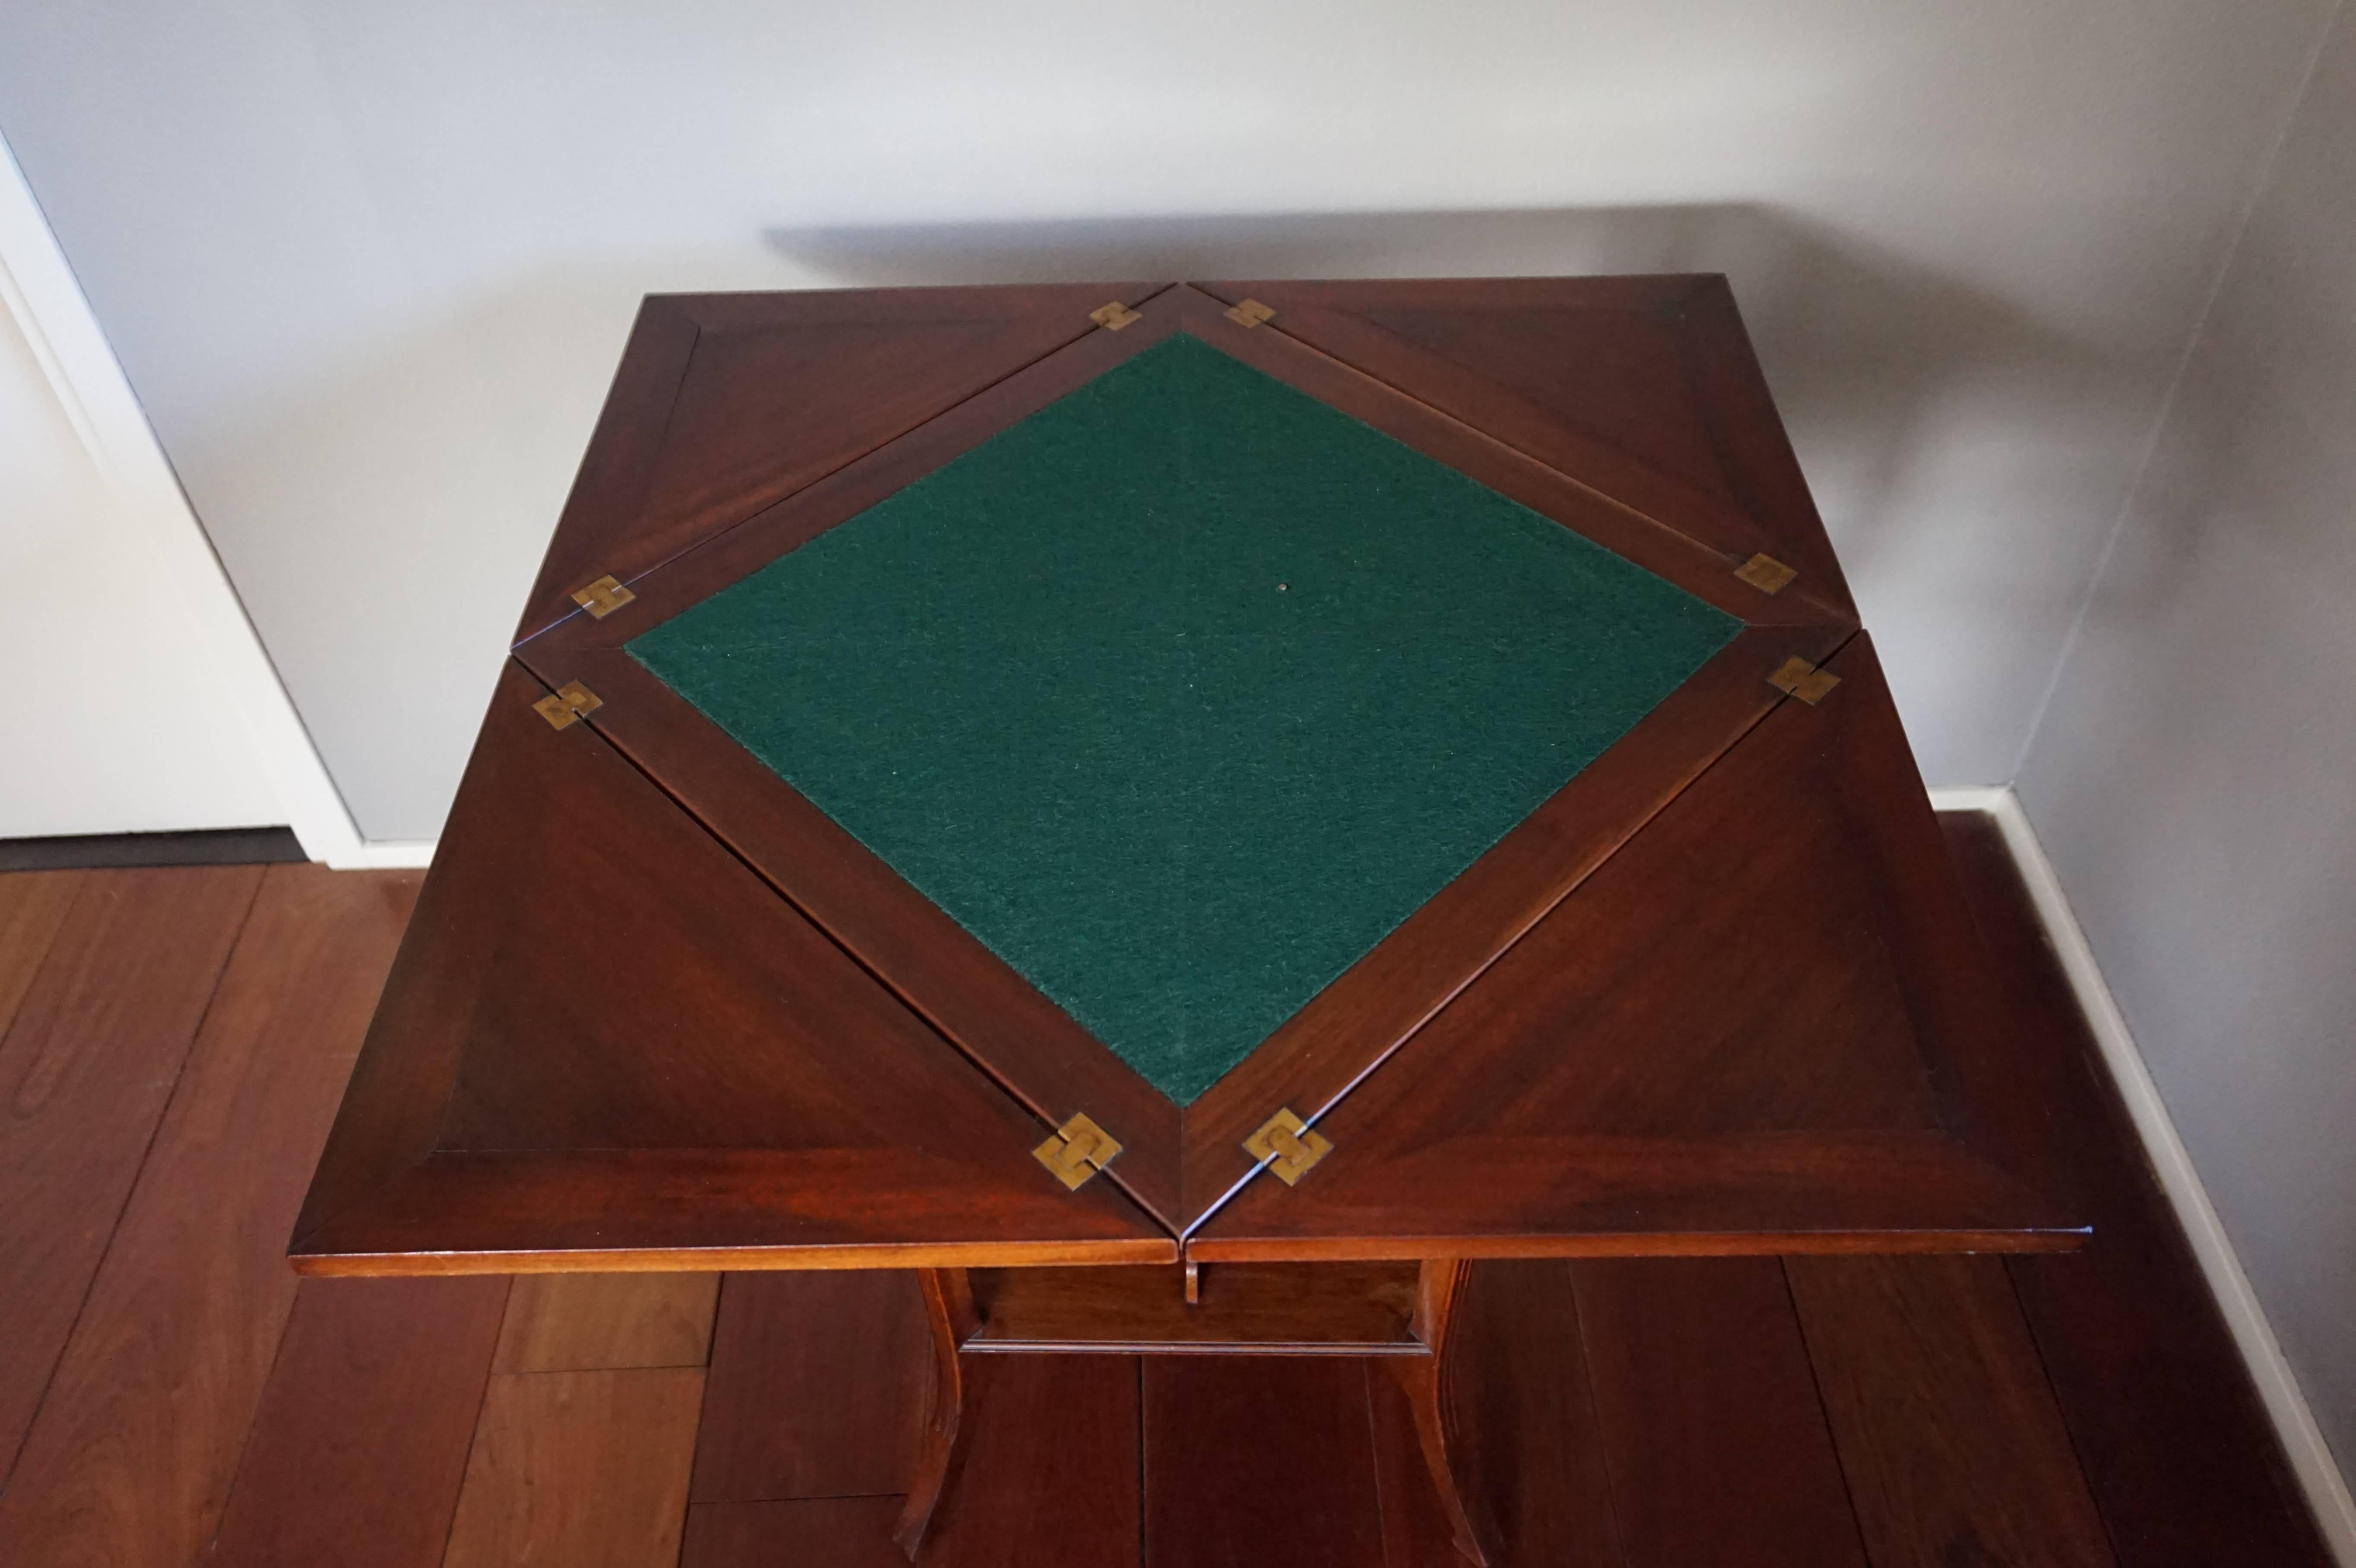 Hand-Crafted Jugendstil Mahogany Cards/Games Table with Bookcase by Pander of the Hague